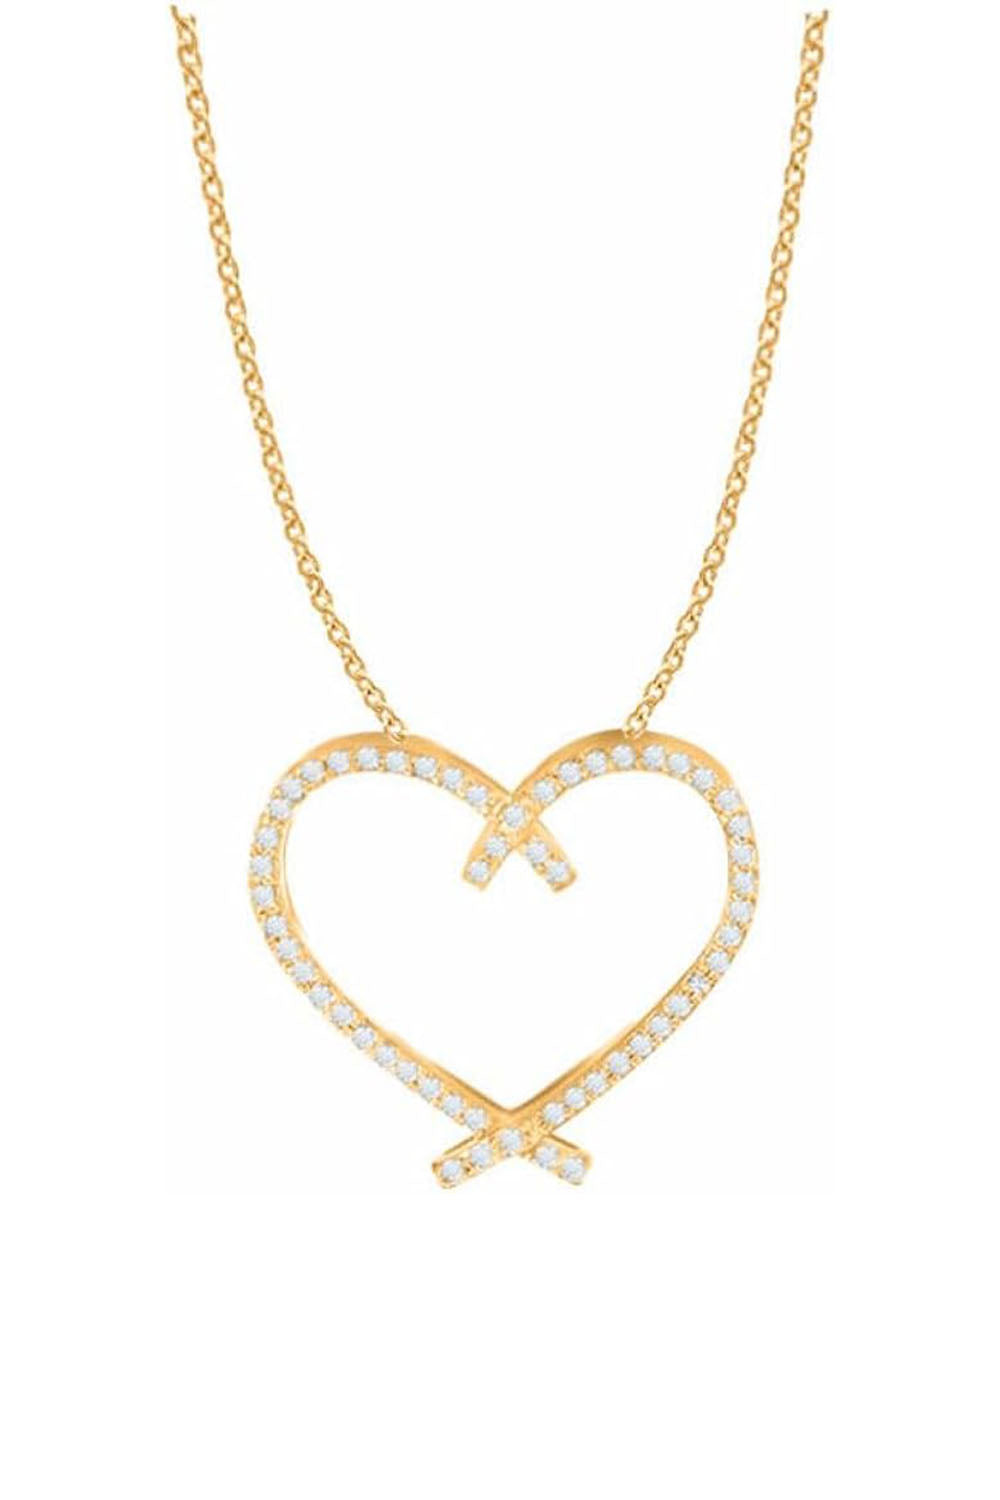 Yellow Gold Color Trendy Round Moissanite Love Heart Pendant Necklace